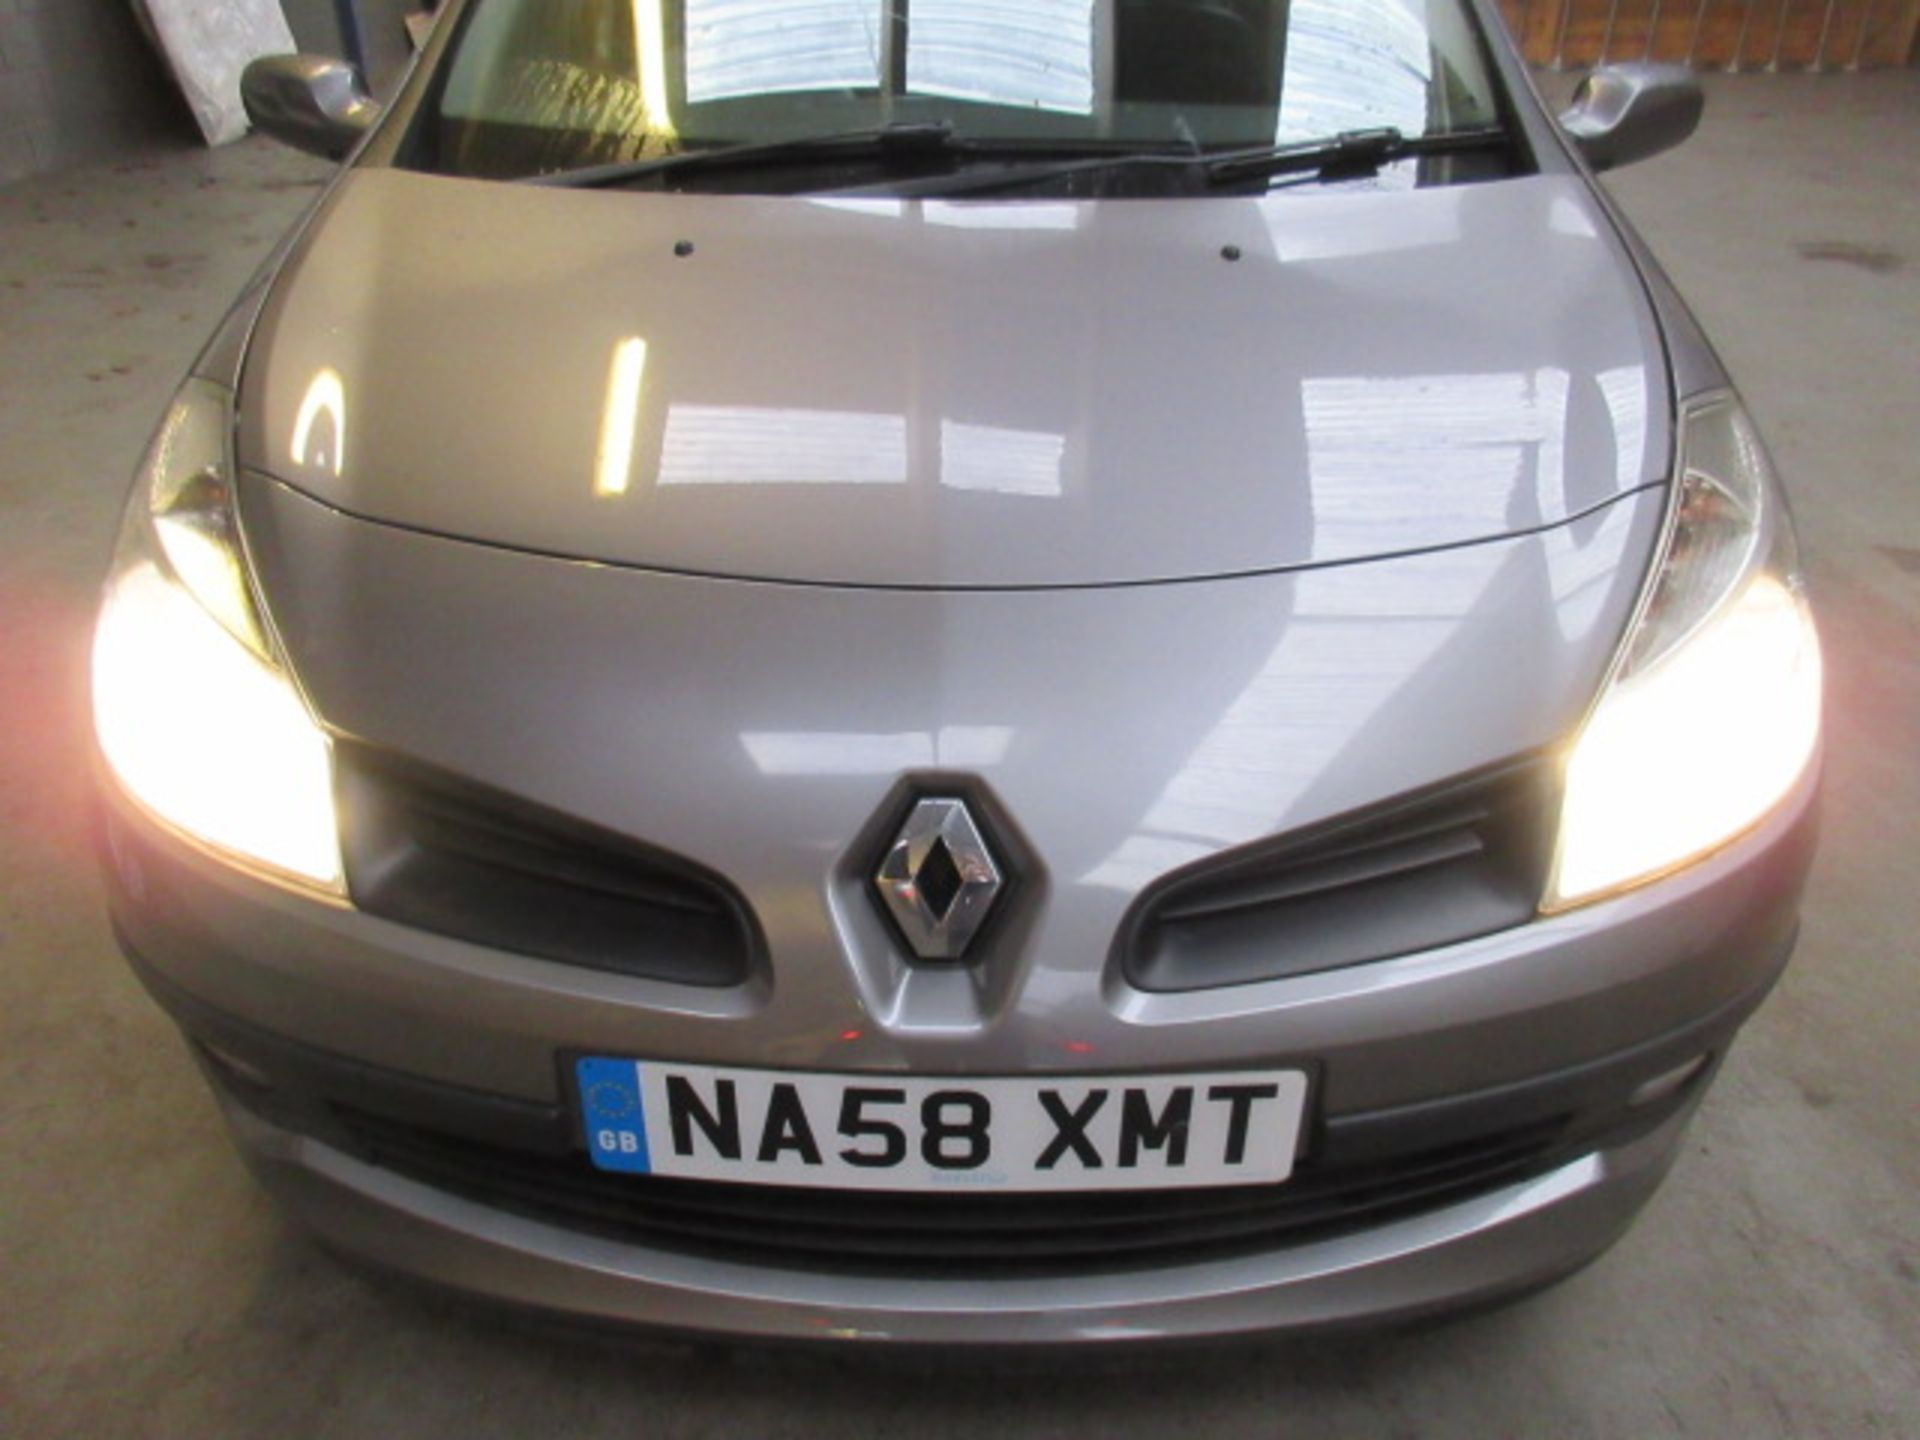 58 08 Renault Clio Expression Turbo - Image 3 of 15